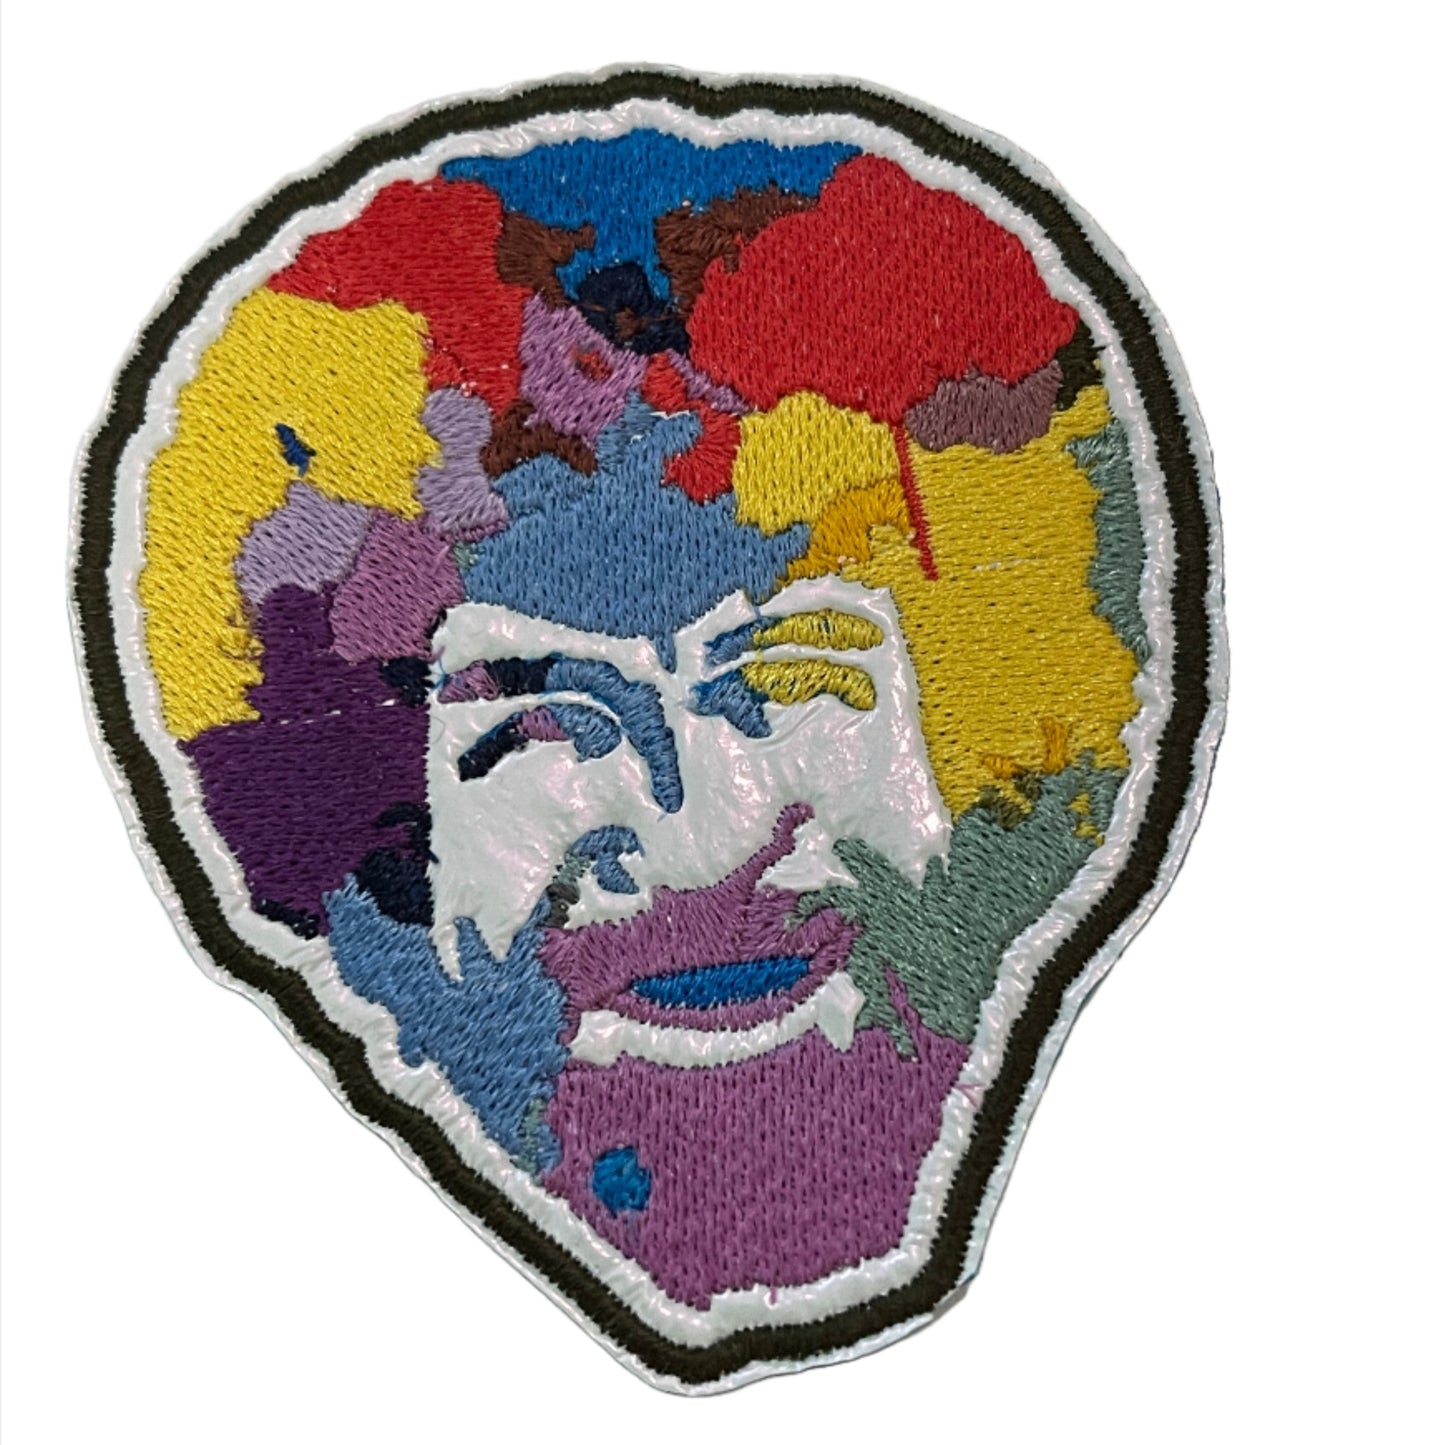 Handmade Happy TV Artist Iron-On Patch | Colorful Portrait on White Holographic